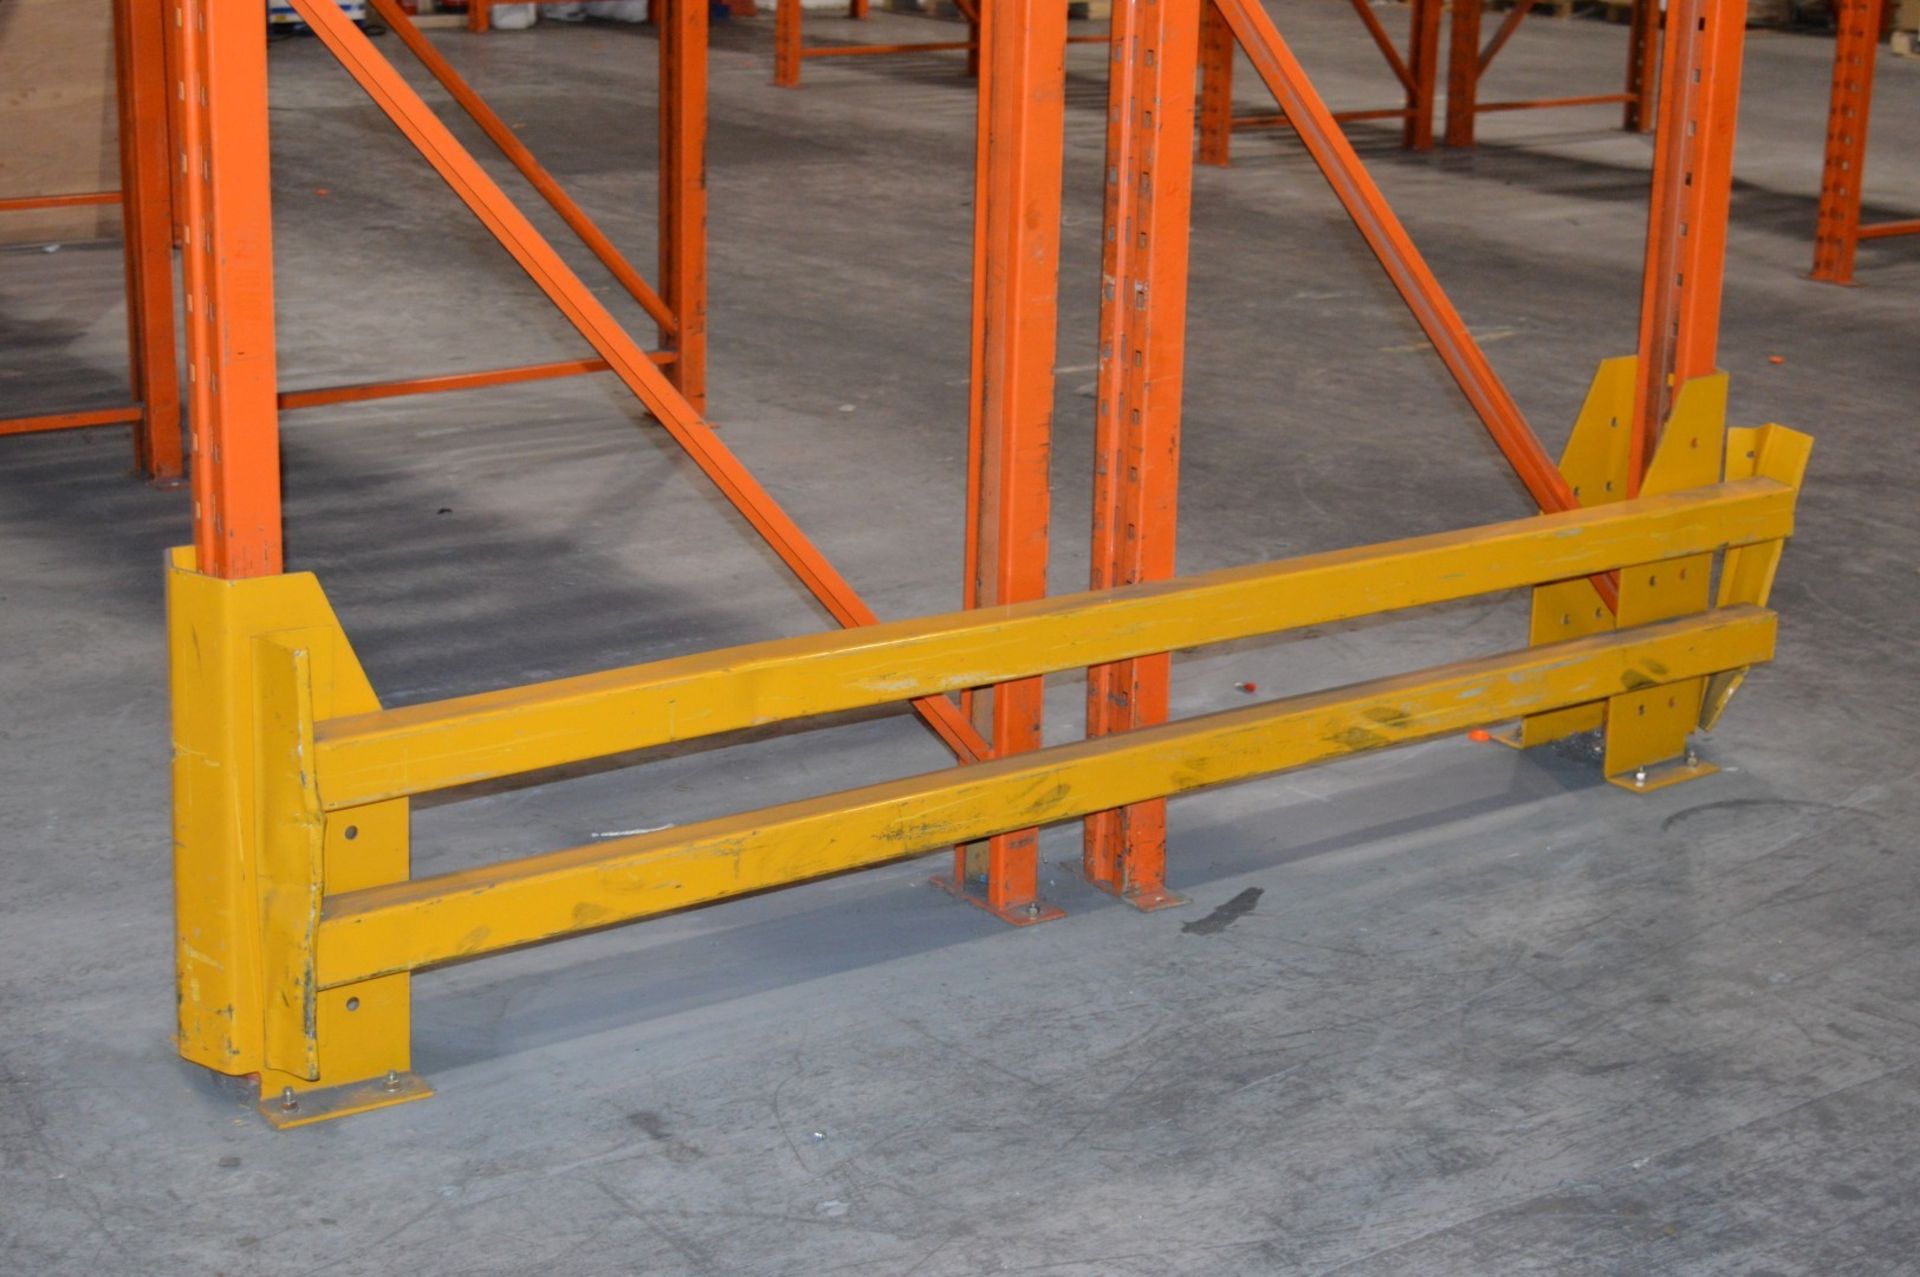 8 x Bays of Warehouse PALLET RACKING - Lot Includes 110 x Uprights, 56 x Crossbeams, 1 x - Image 4 of 9